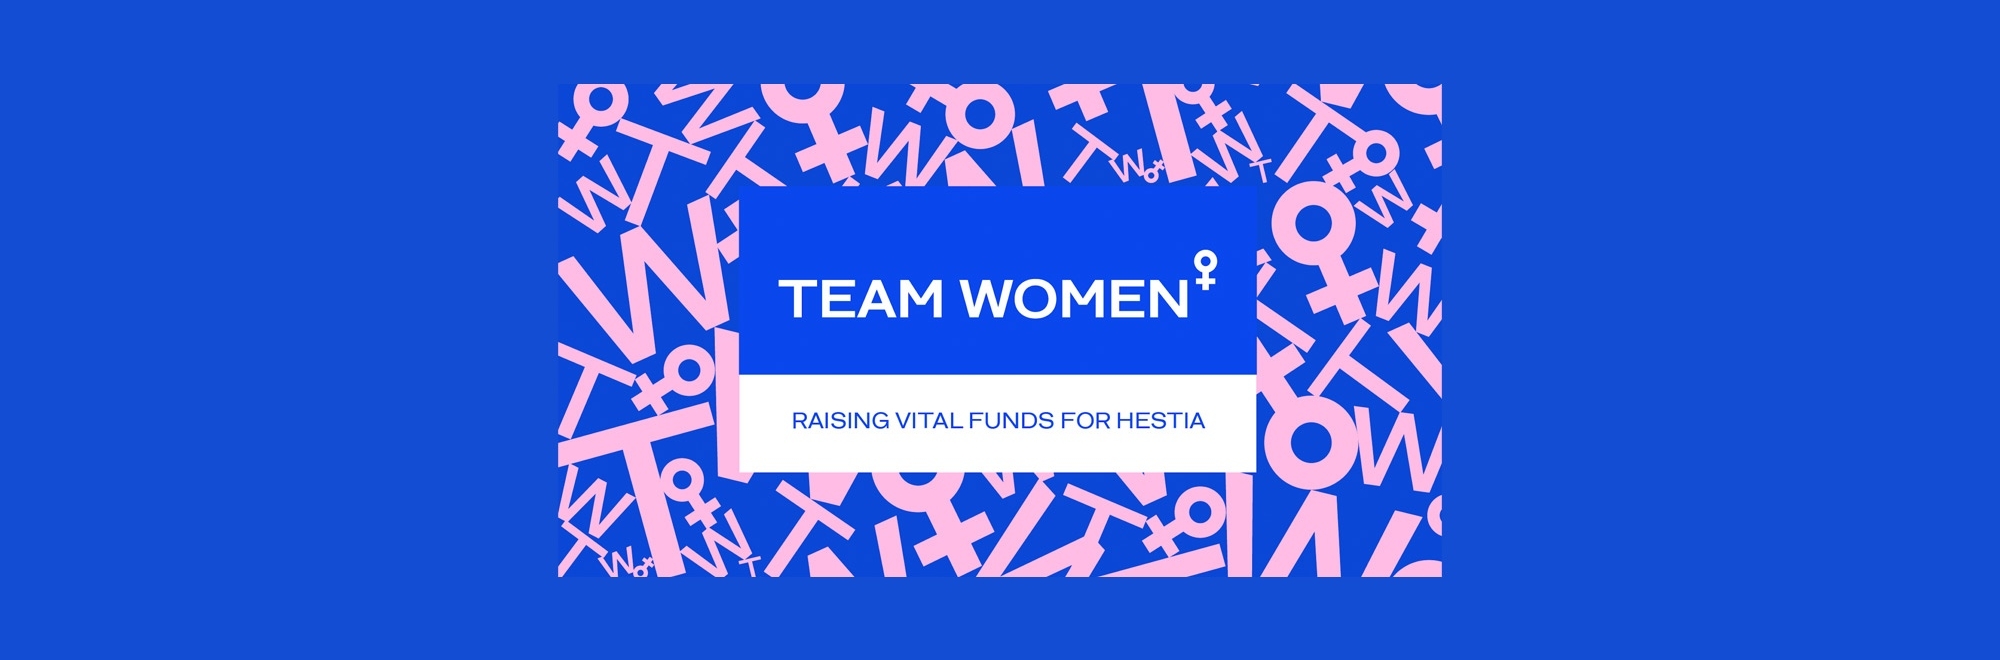 Wunderman Thompson enlists the help of upcoming female artists for domestic abuse charity hestia this international women’s day